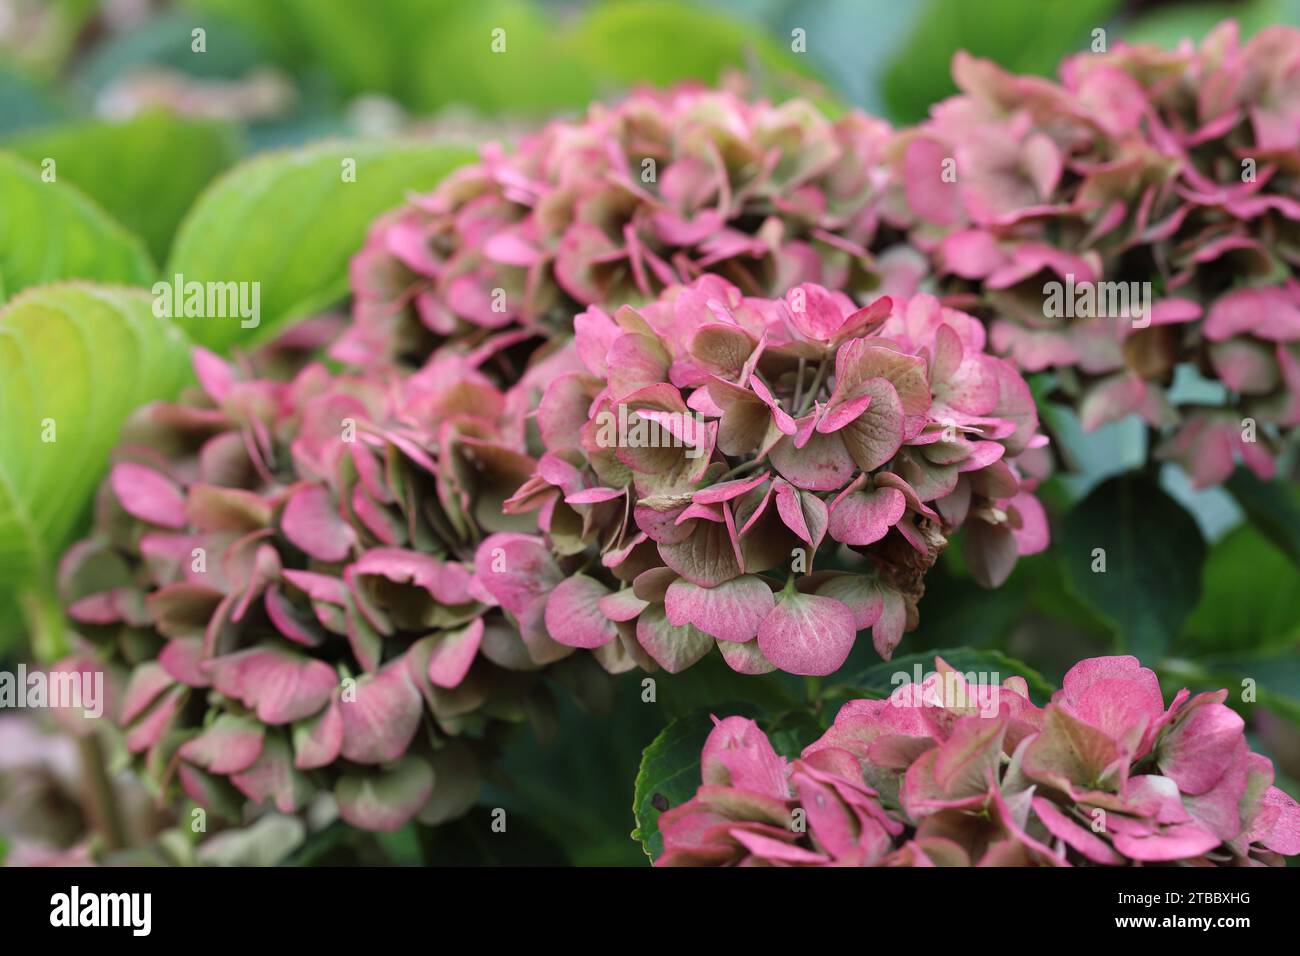 View of several beautiful Hydrangea macrophylla flower heads with autumnal discoloration, natural environment, side view Stock Photo